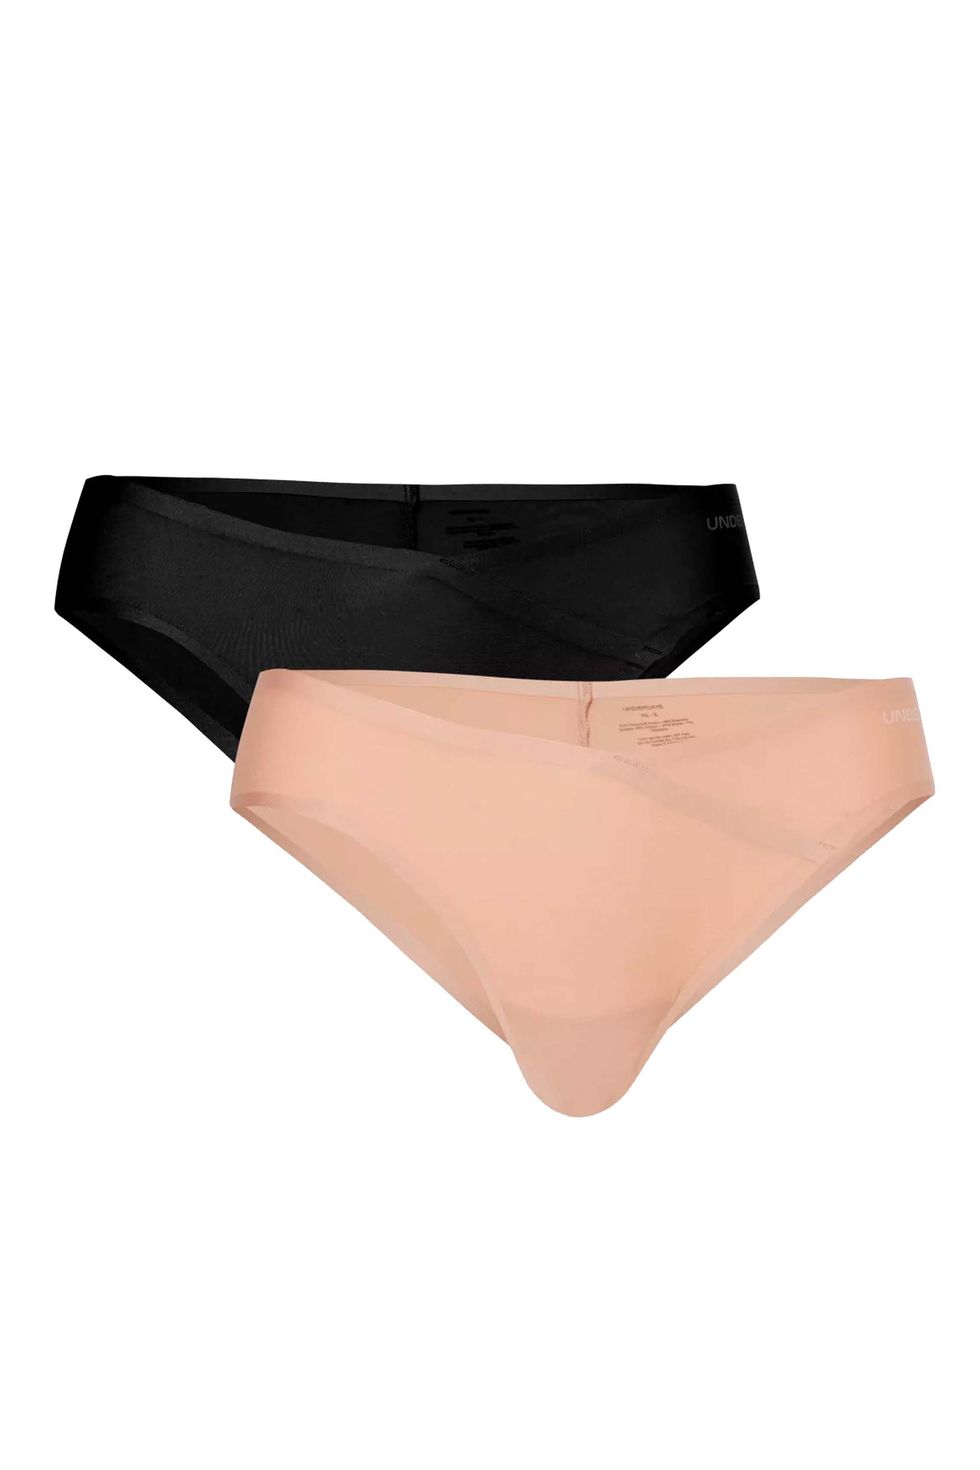 Top Rated Products in All Panties